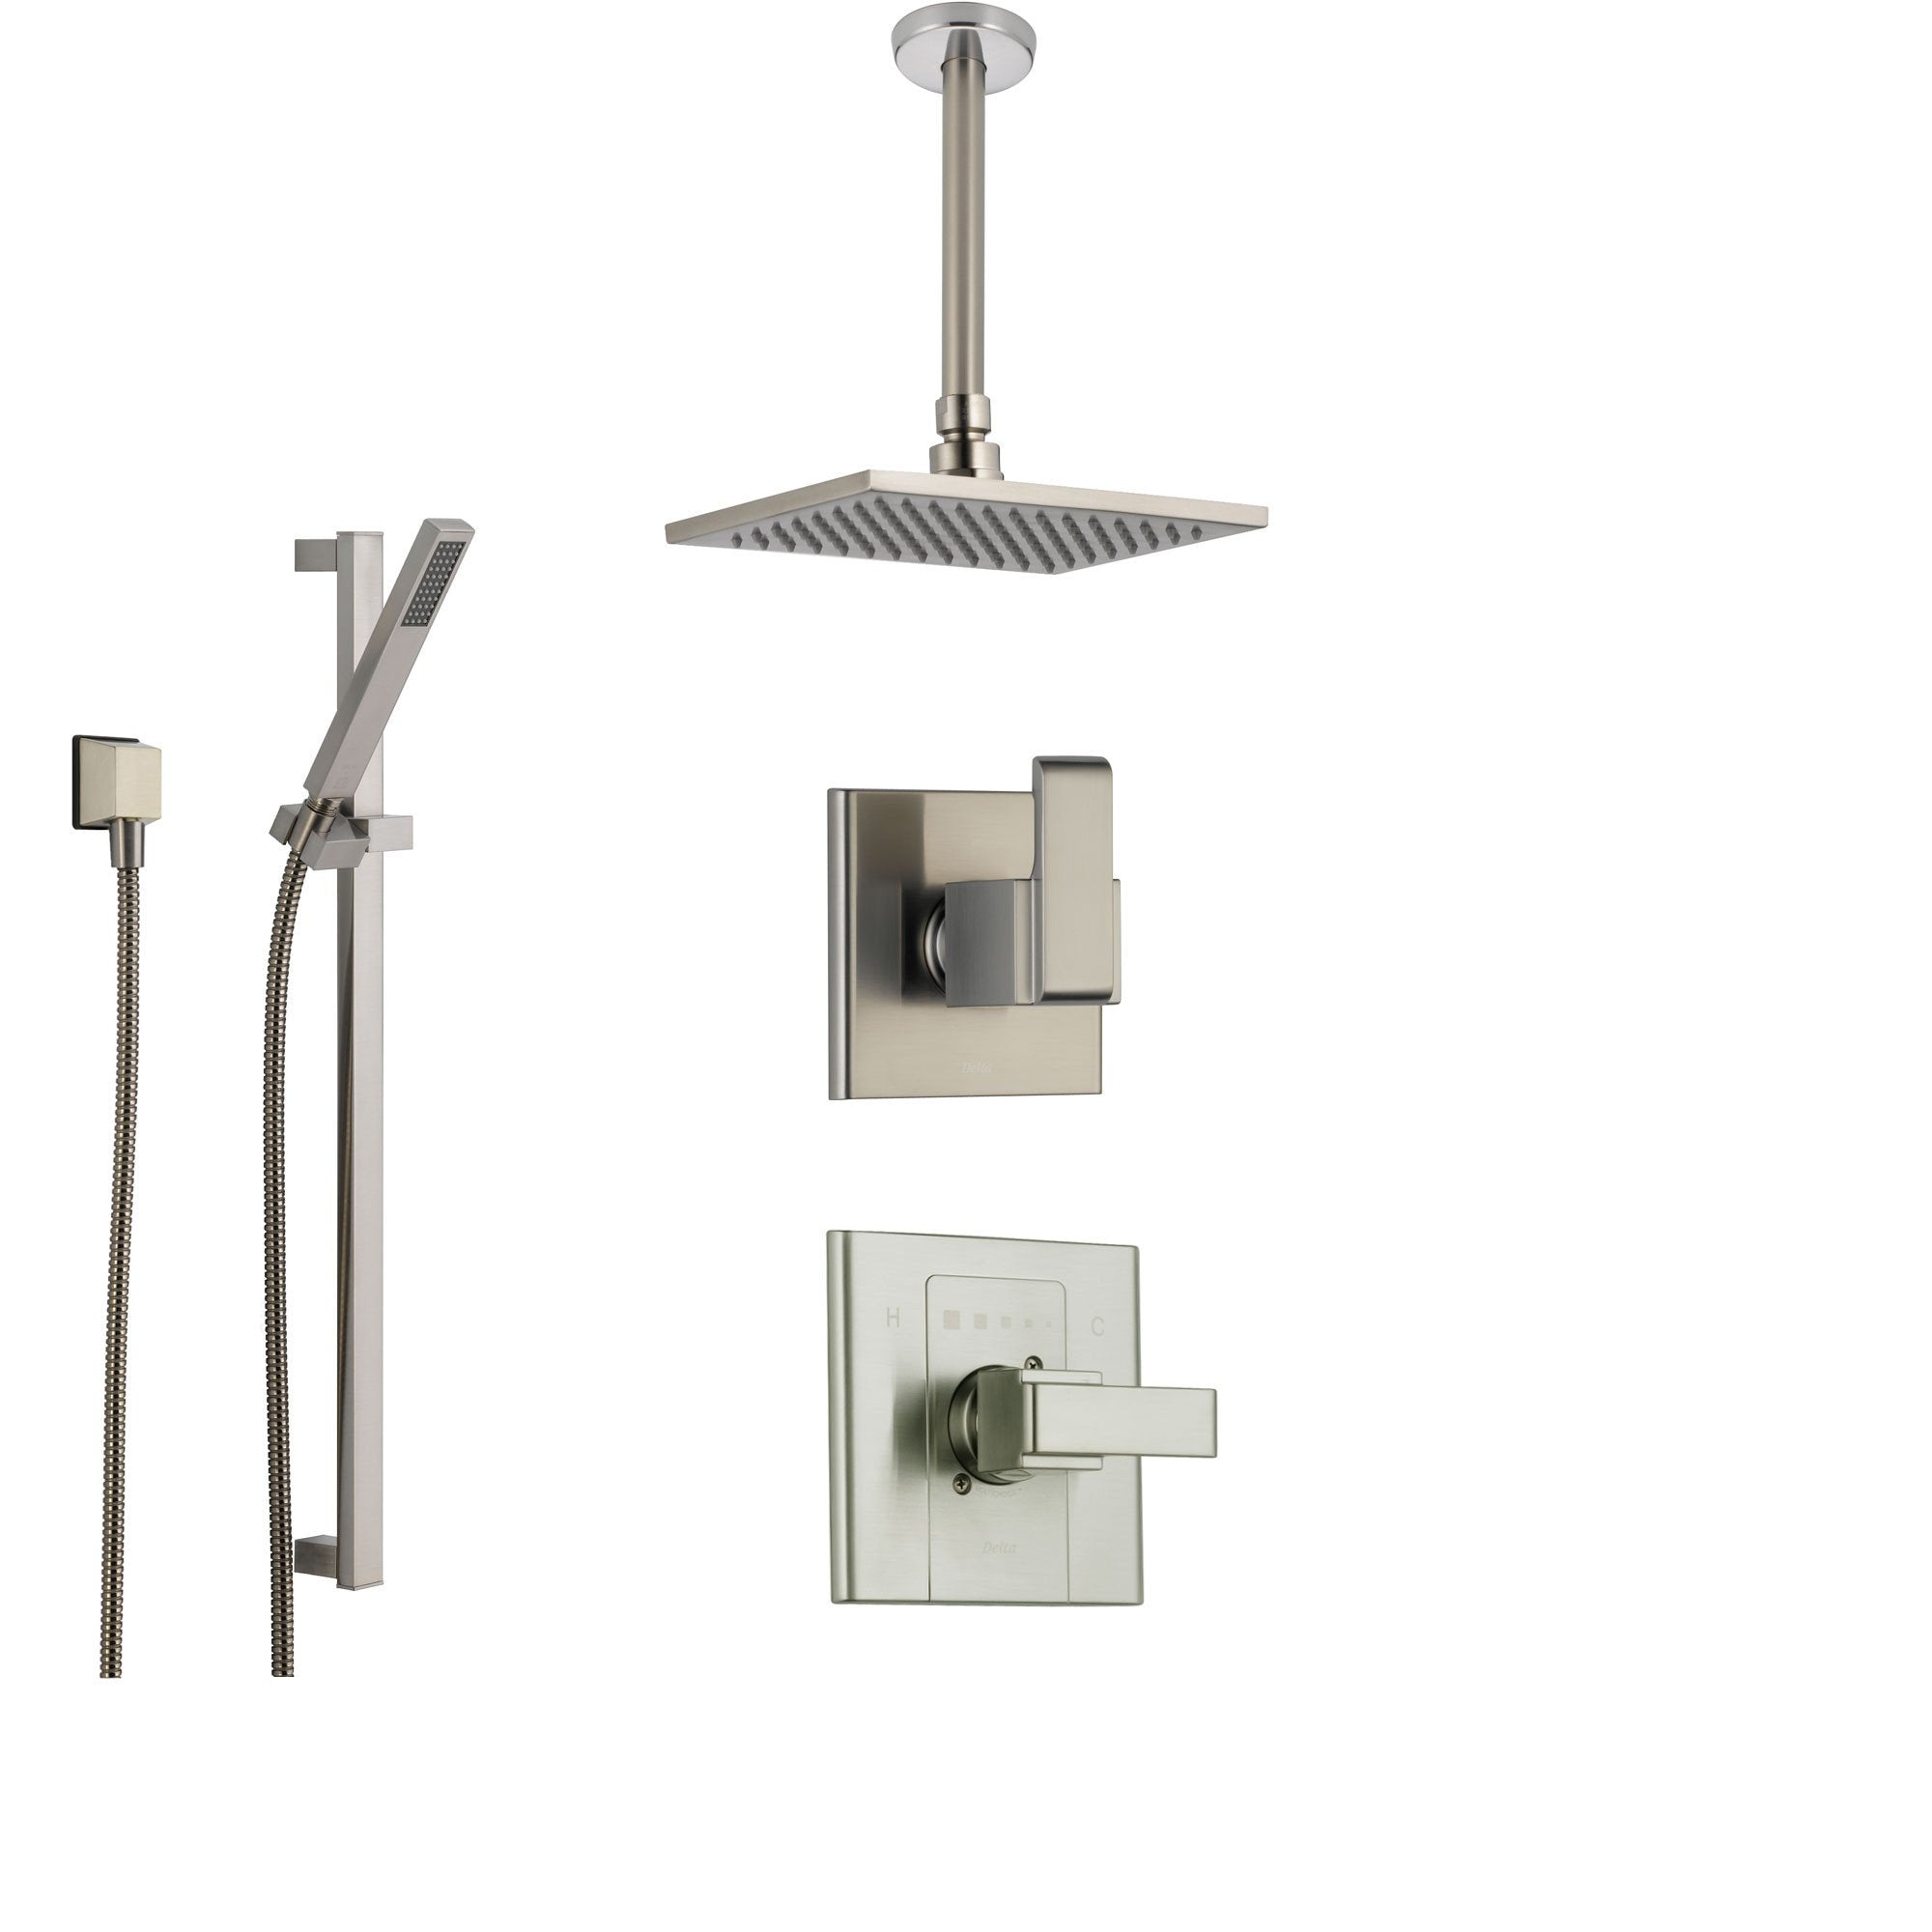 Delta Arzo Stainless Steel Shower System with Normal Shower Handle, 3-setting Diverter, Modern Square Ceiling Mount Showerhead, and Hand Shower Spray SS148681SS